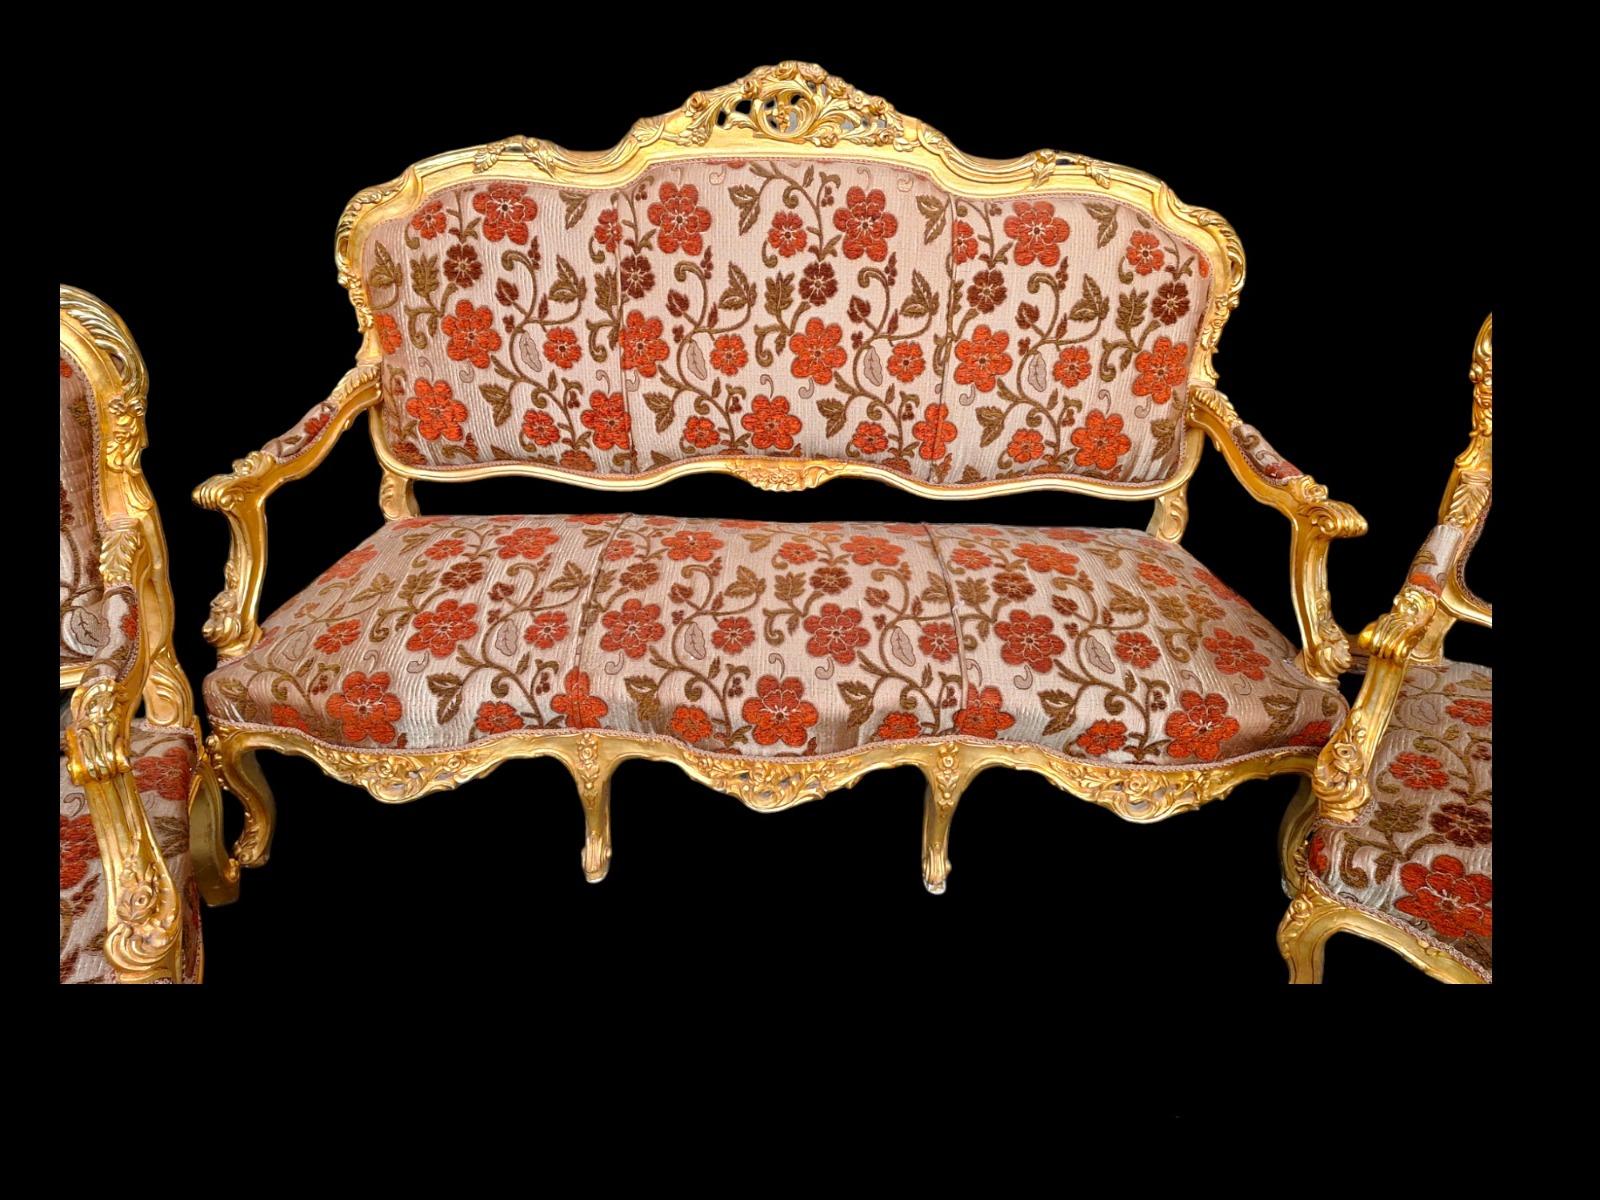 Very decorative sofaset in carved wood and guilded in Louis 15 style